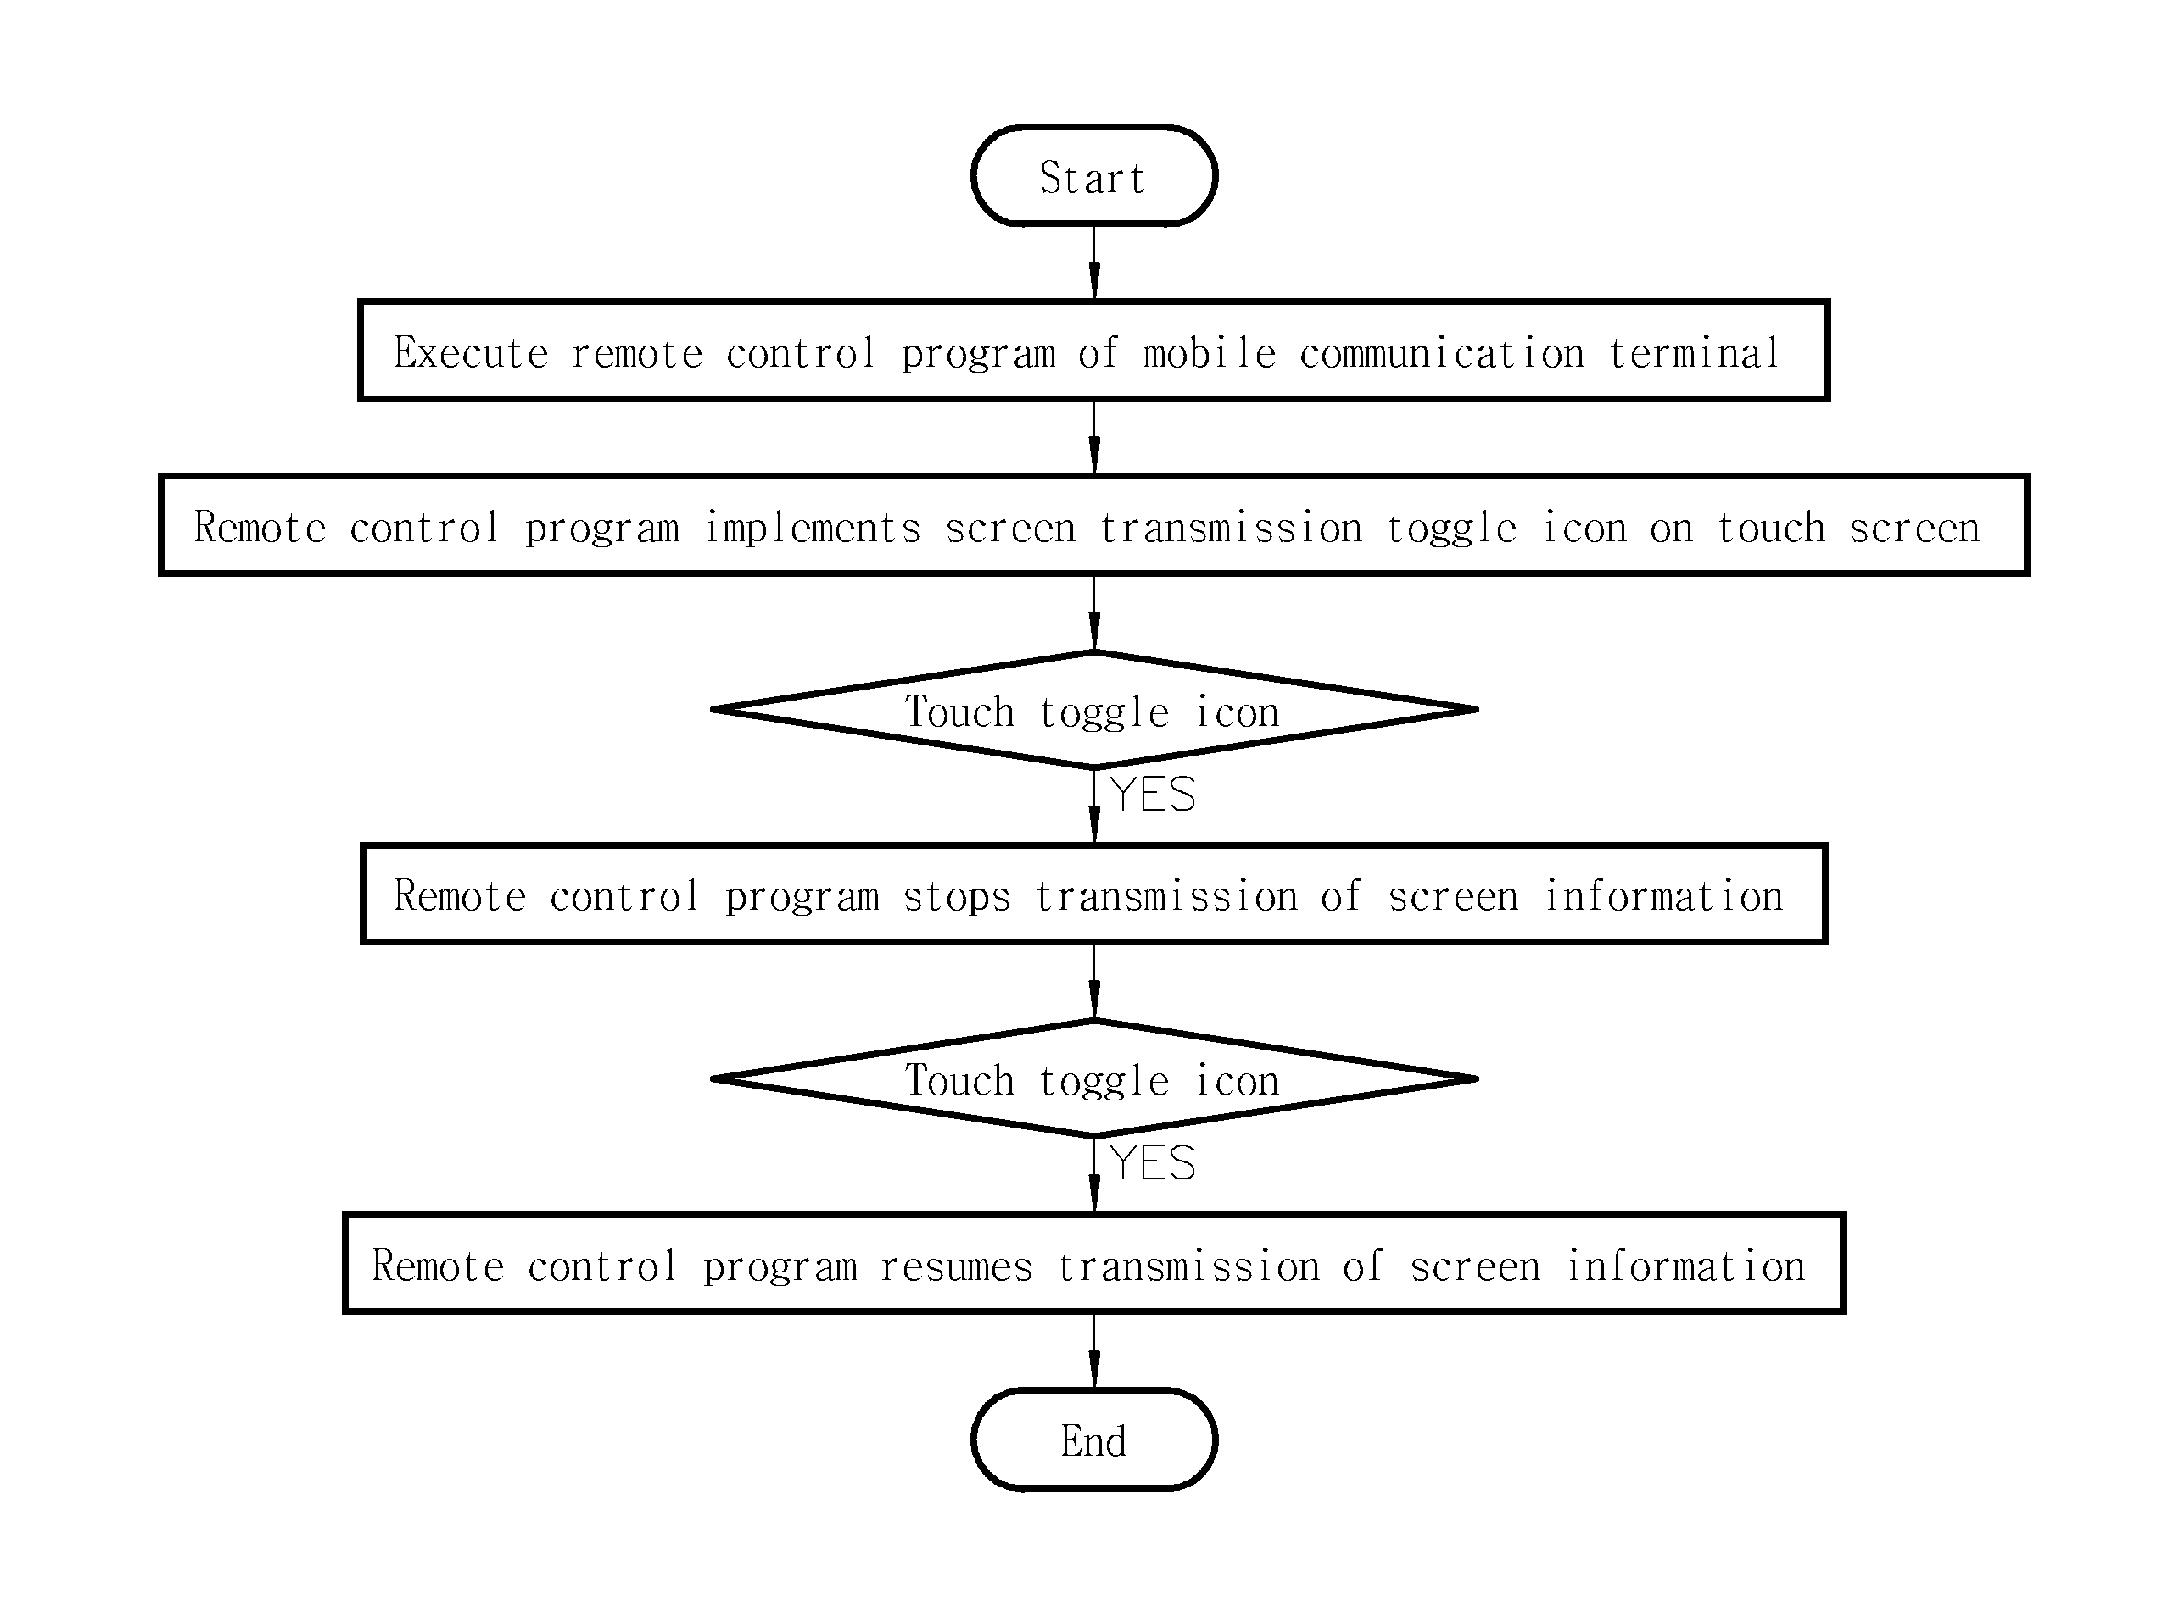 Method of blocking transmission of screen information of mobile communication terminal while performing remote control using icon